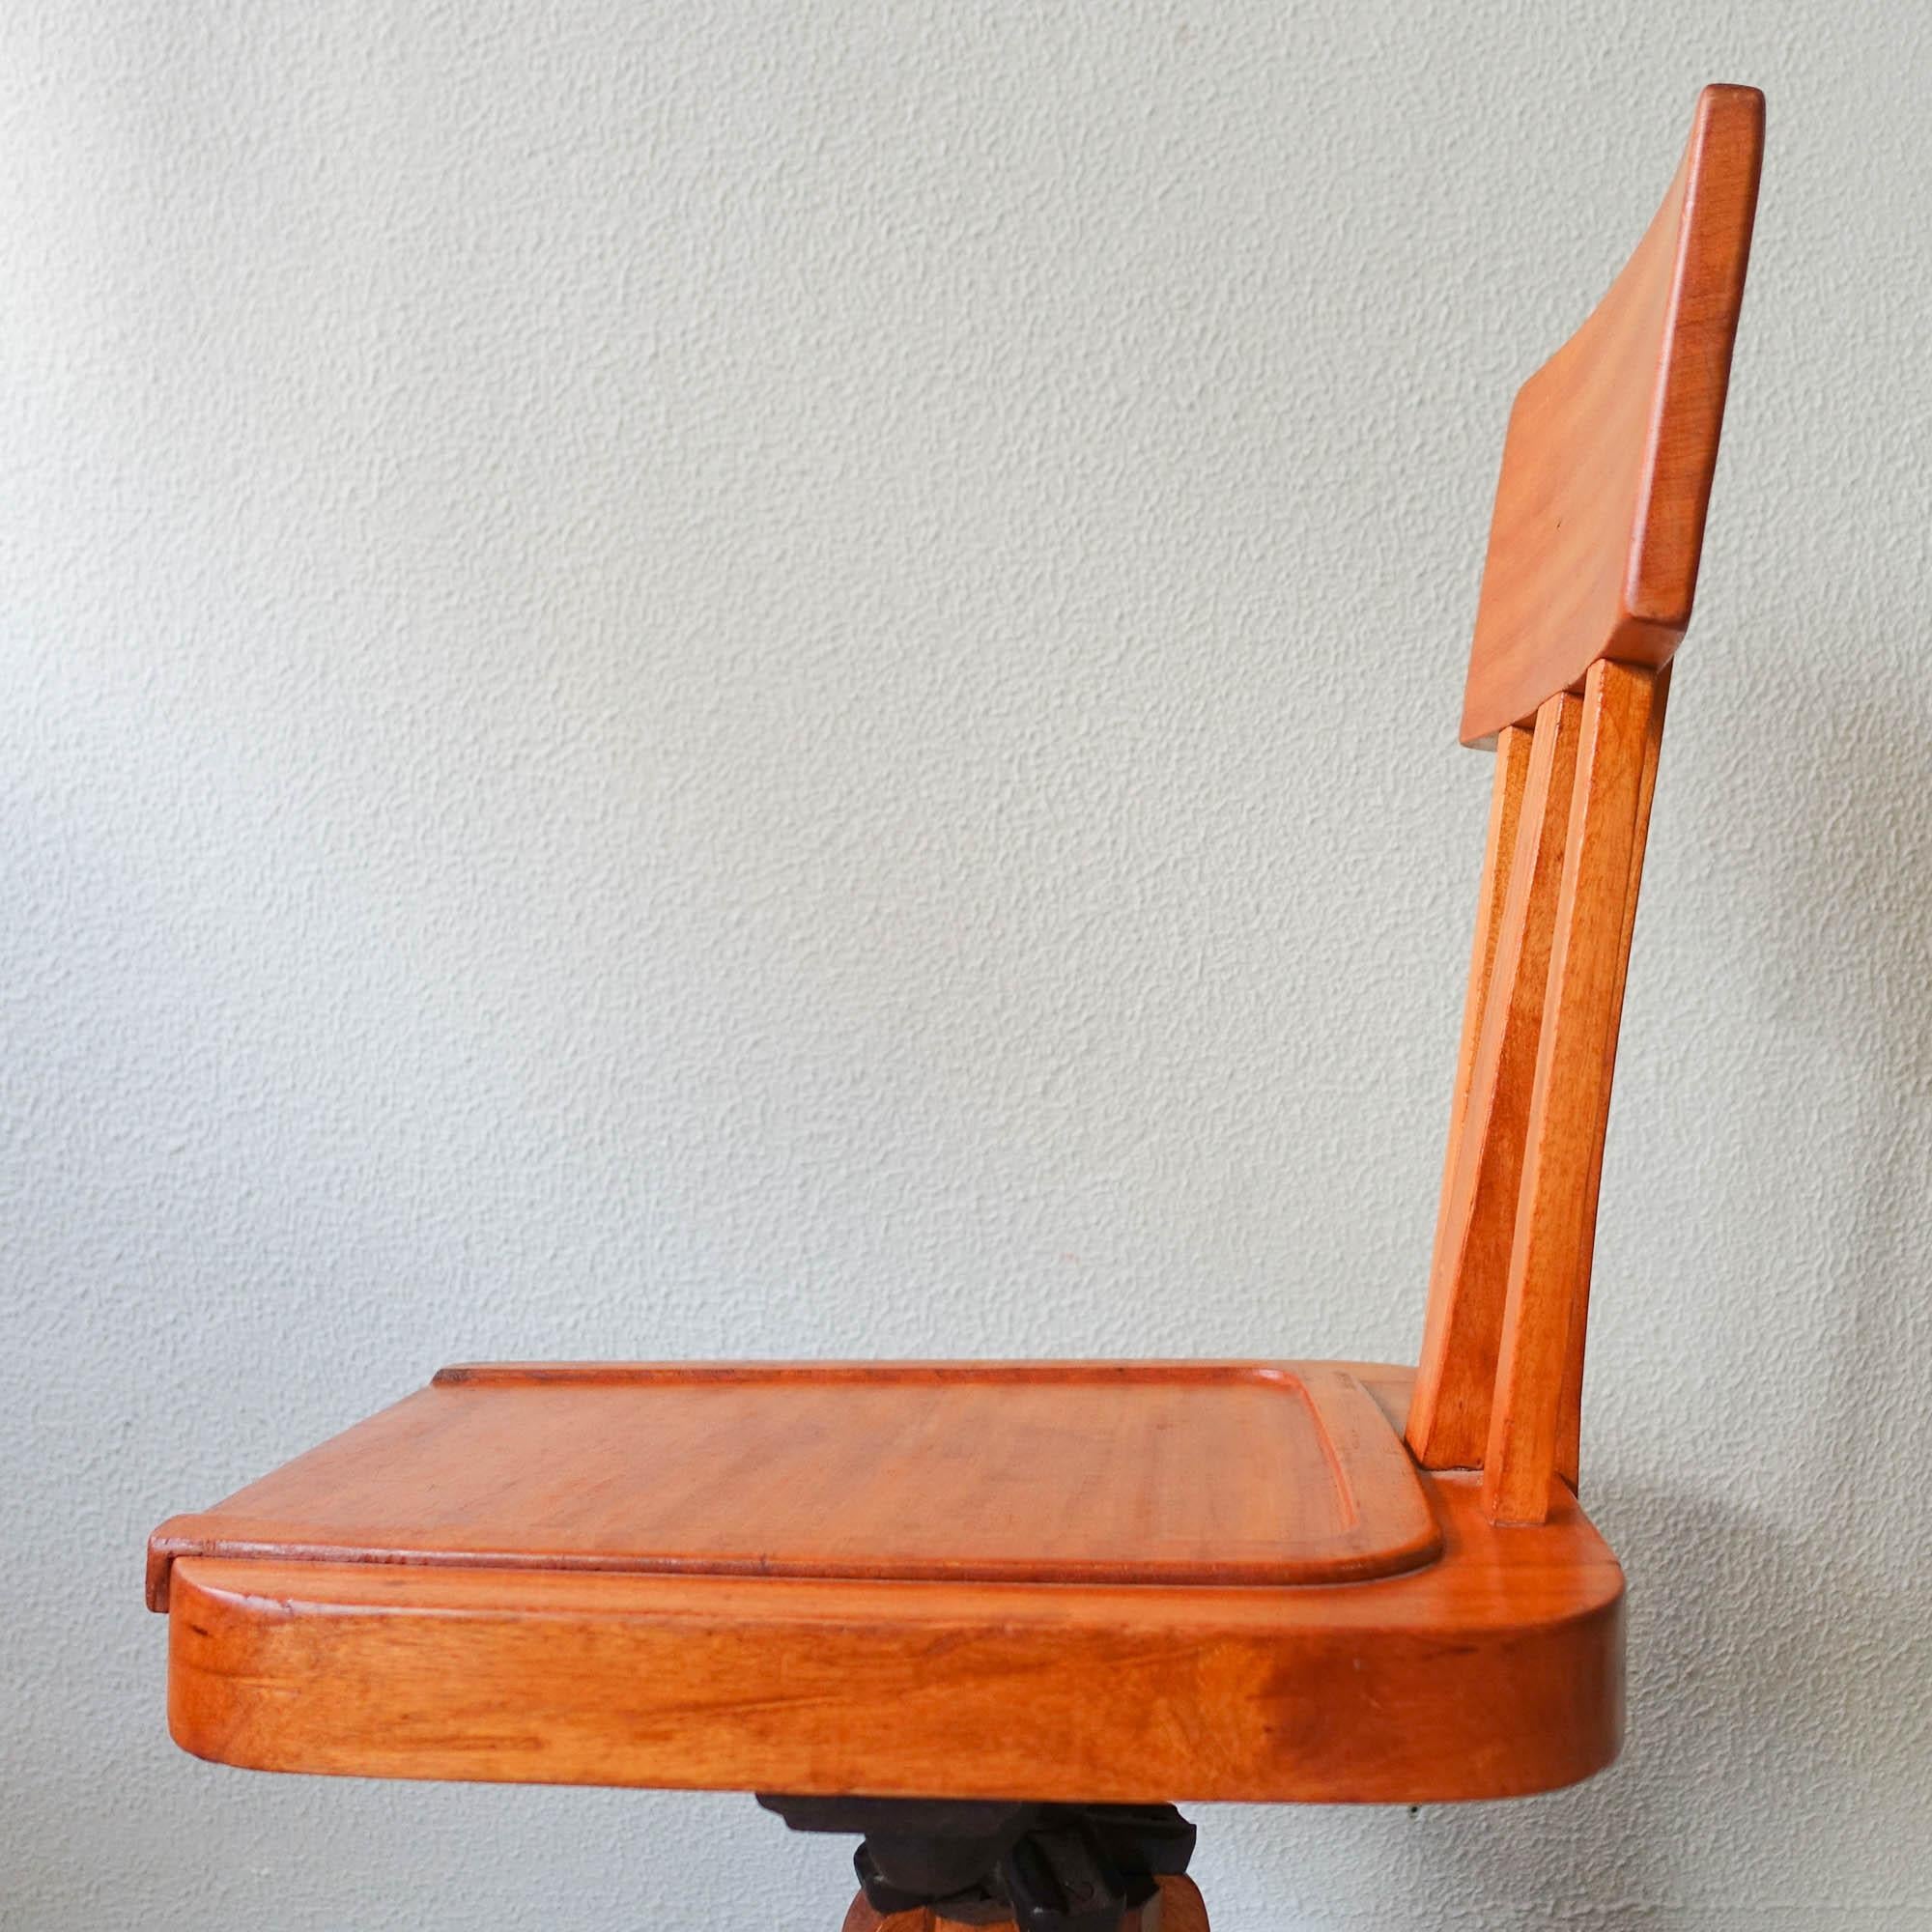 Typist Chair, Model Simples, by Móveis Olaio, 1940's For Sale 3